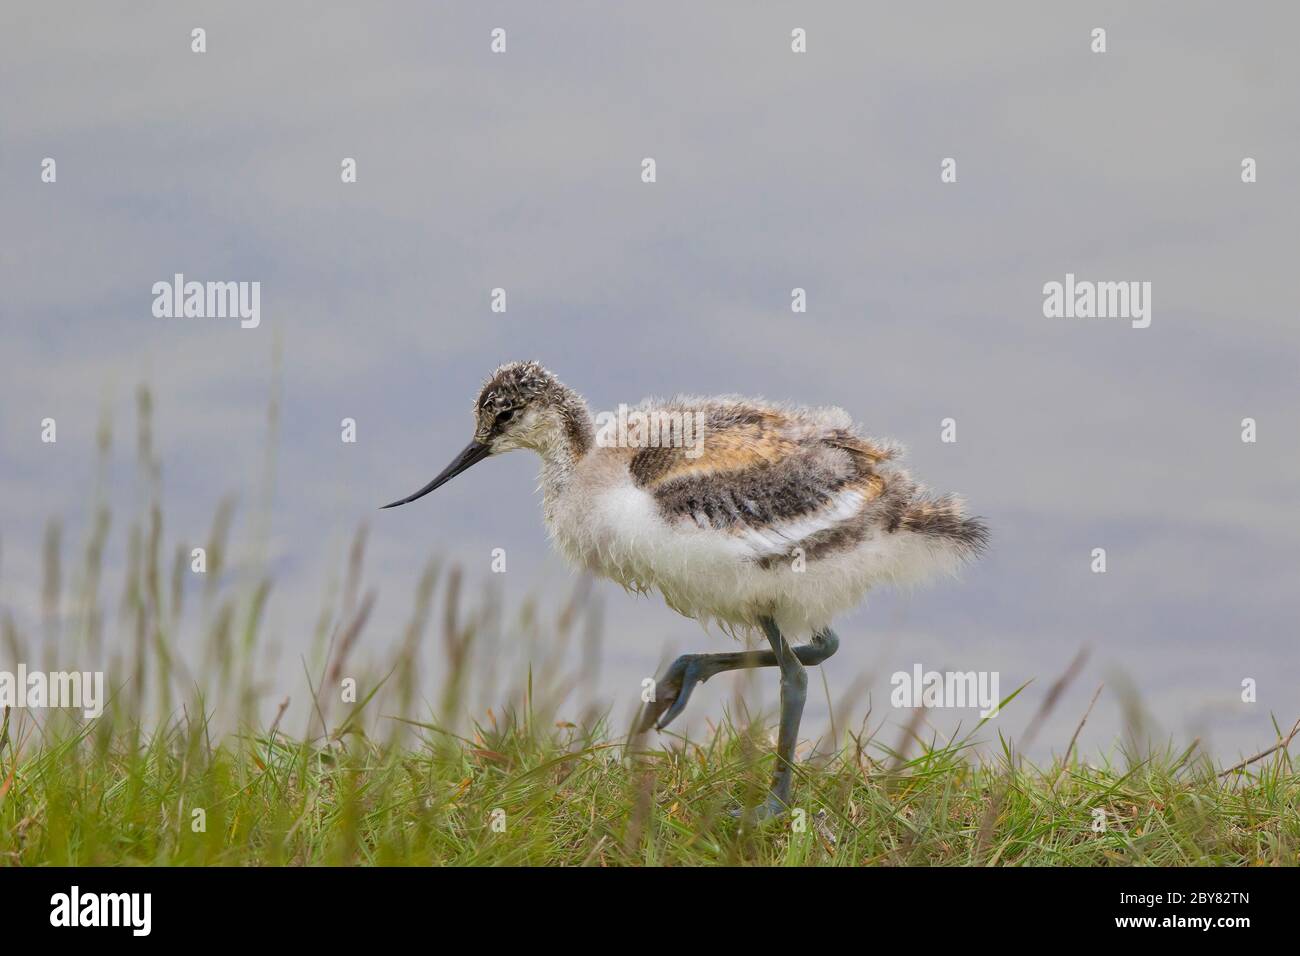 Side view close up of fluffy, wild, UK avocet chick (Recurvirostra avosetta) isolated outdoors on grass, on one leg, facing left. Stock Photo